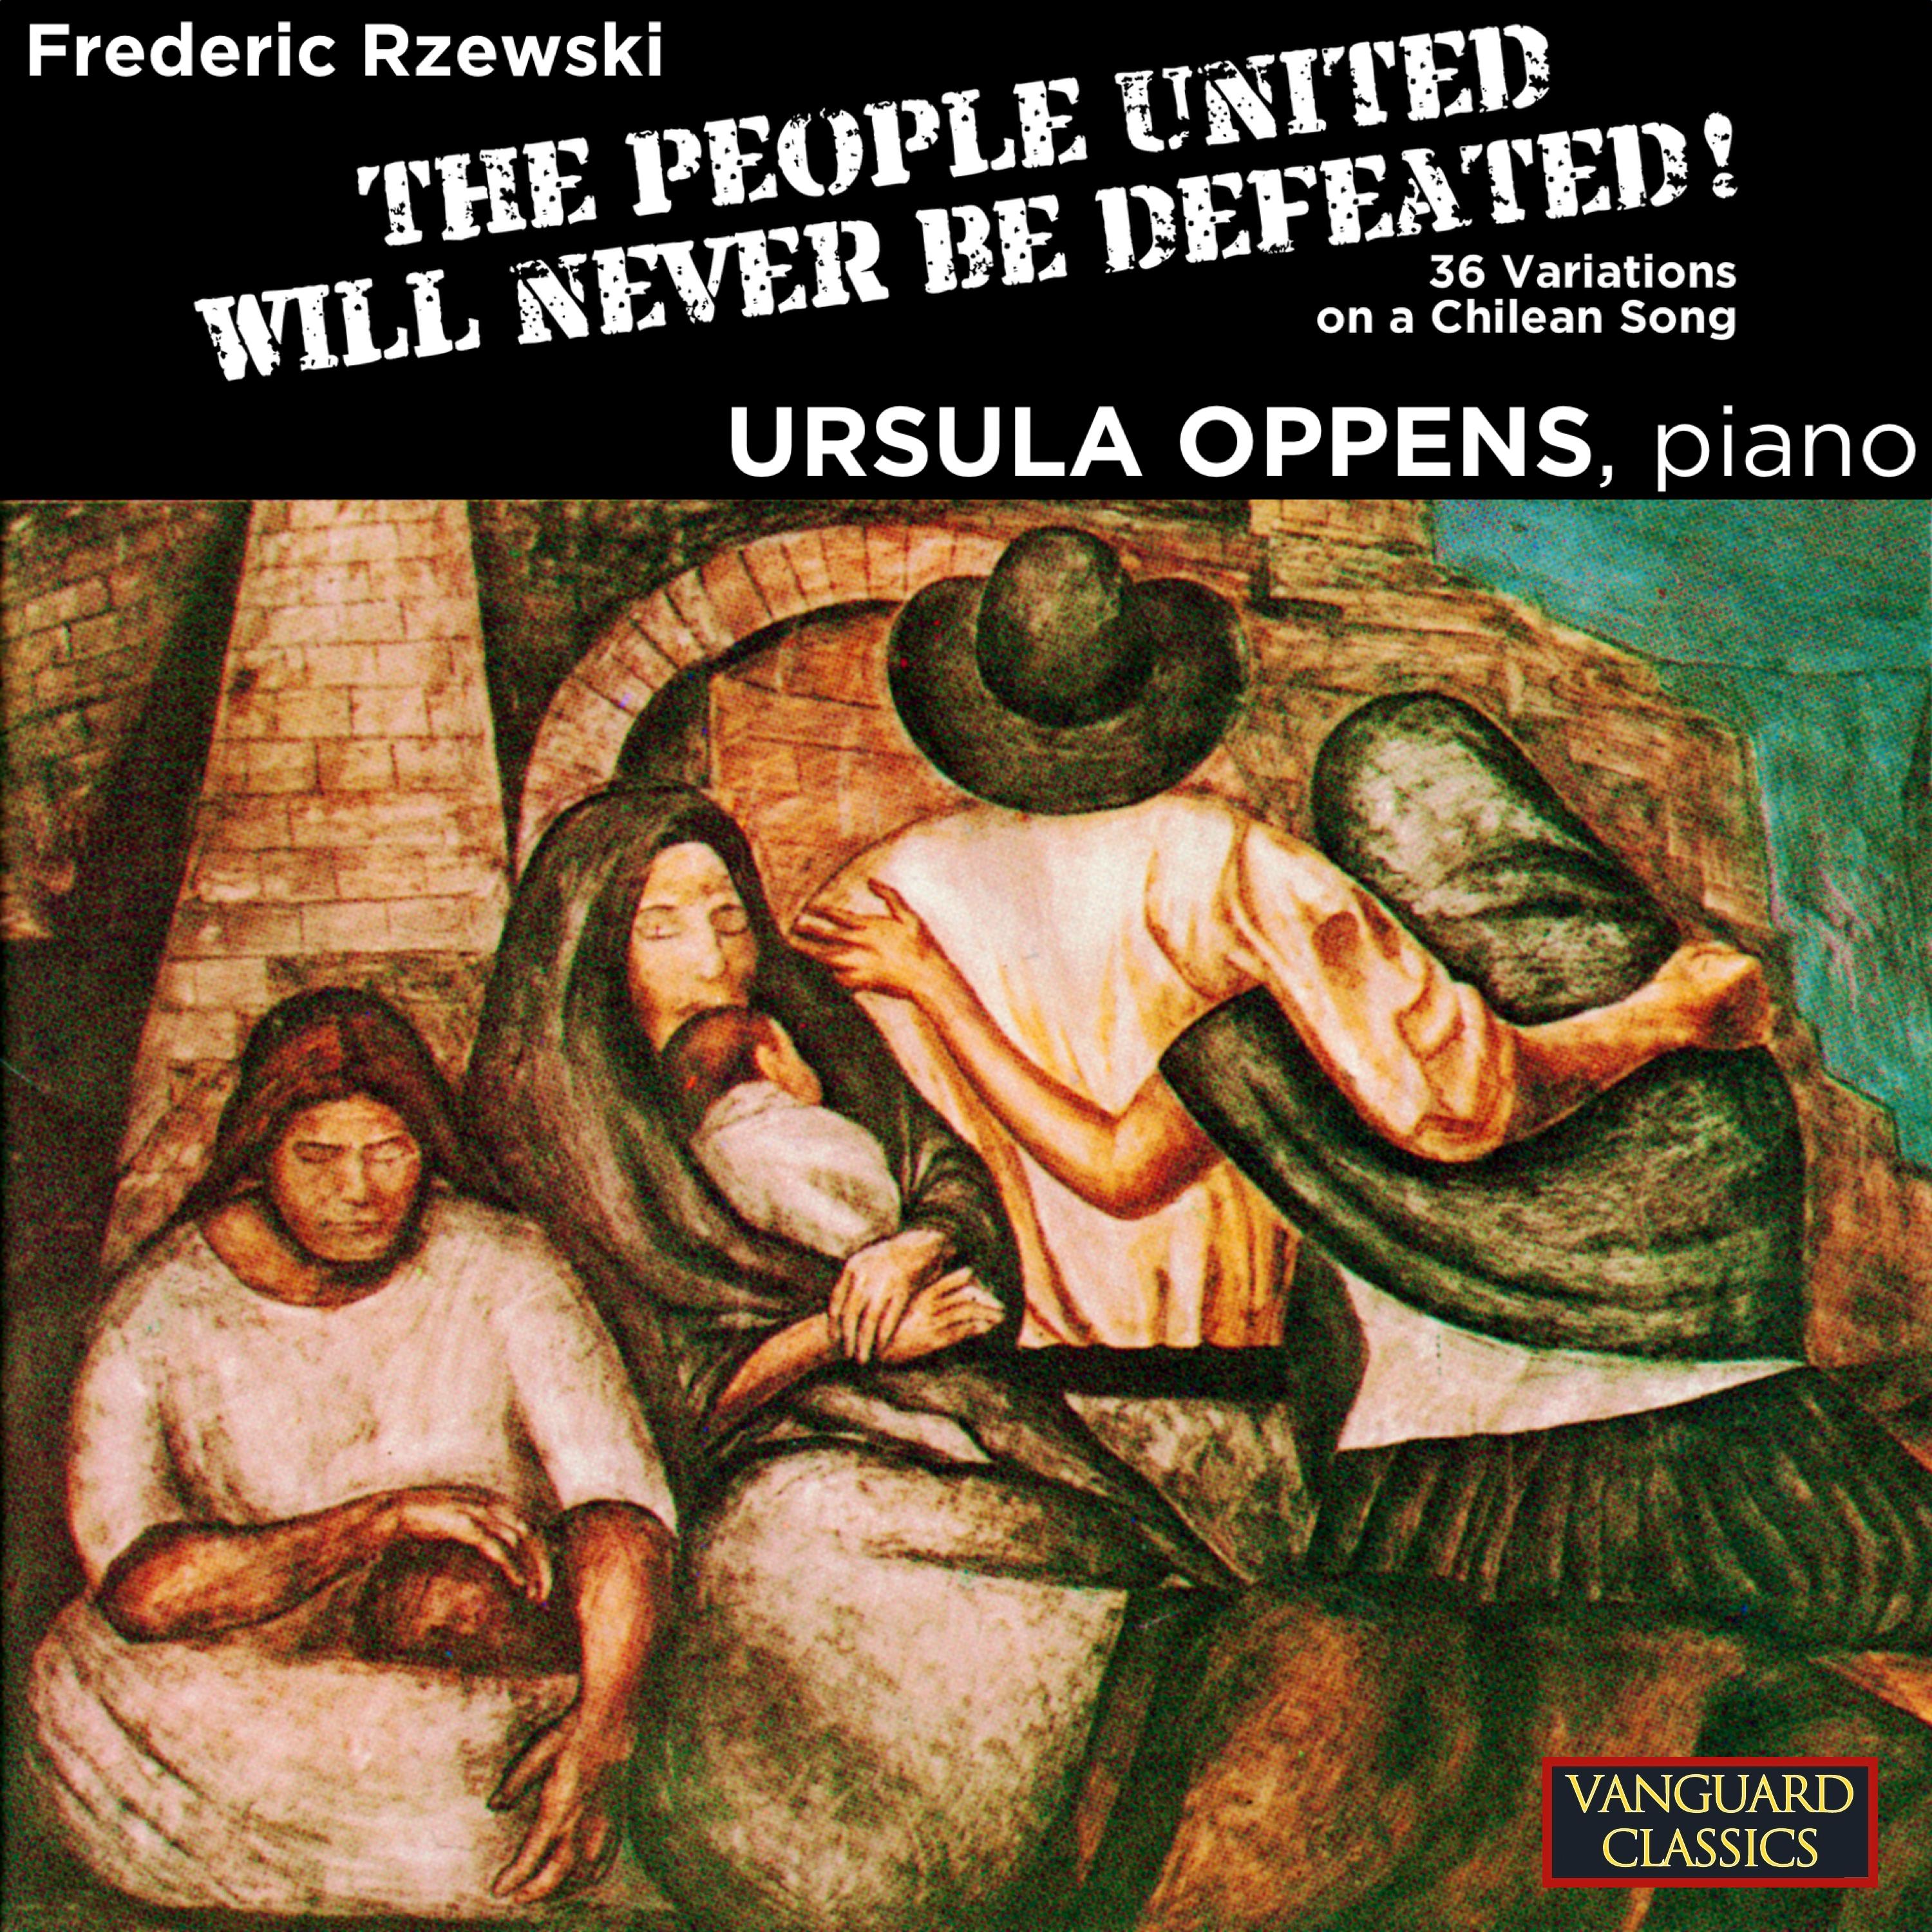 Ursula Oppens - The People United Will Never Be Defeated!:Variation 6. Same tempo as beginning